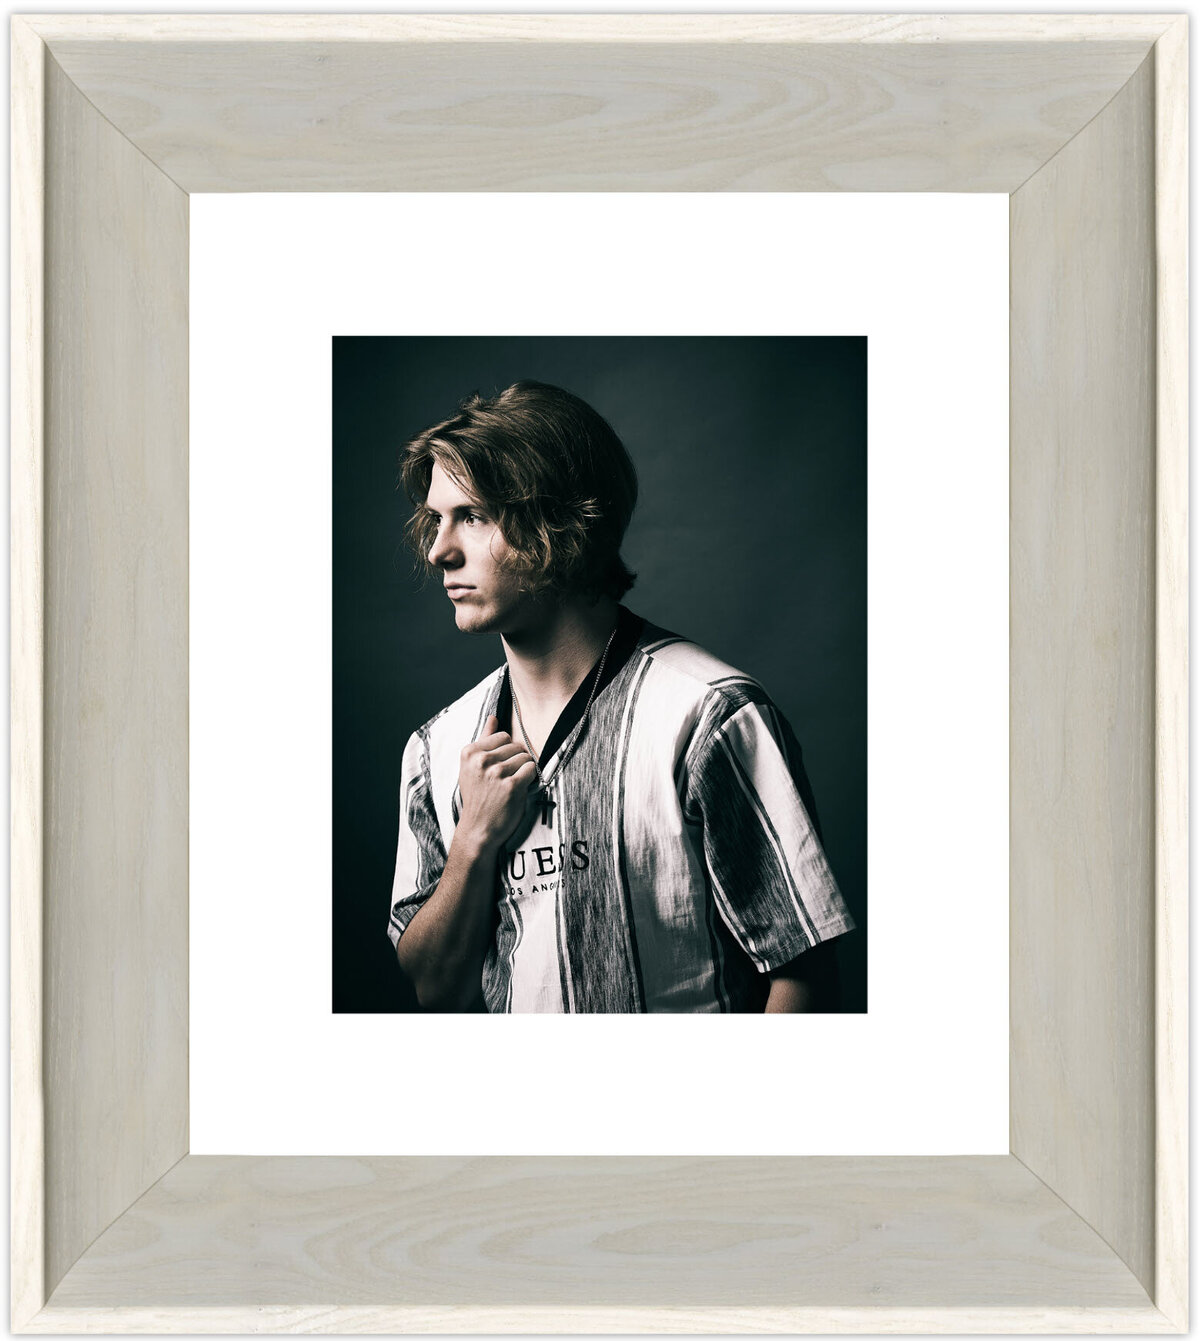 Senior Gabe works the look with confidence, mounted in a Gallery White frame with White Mat